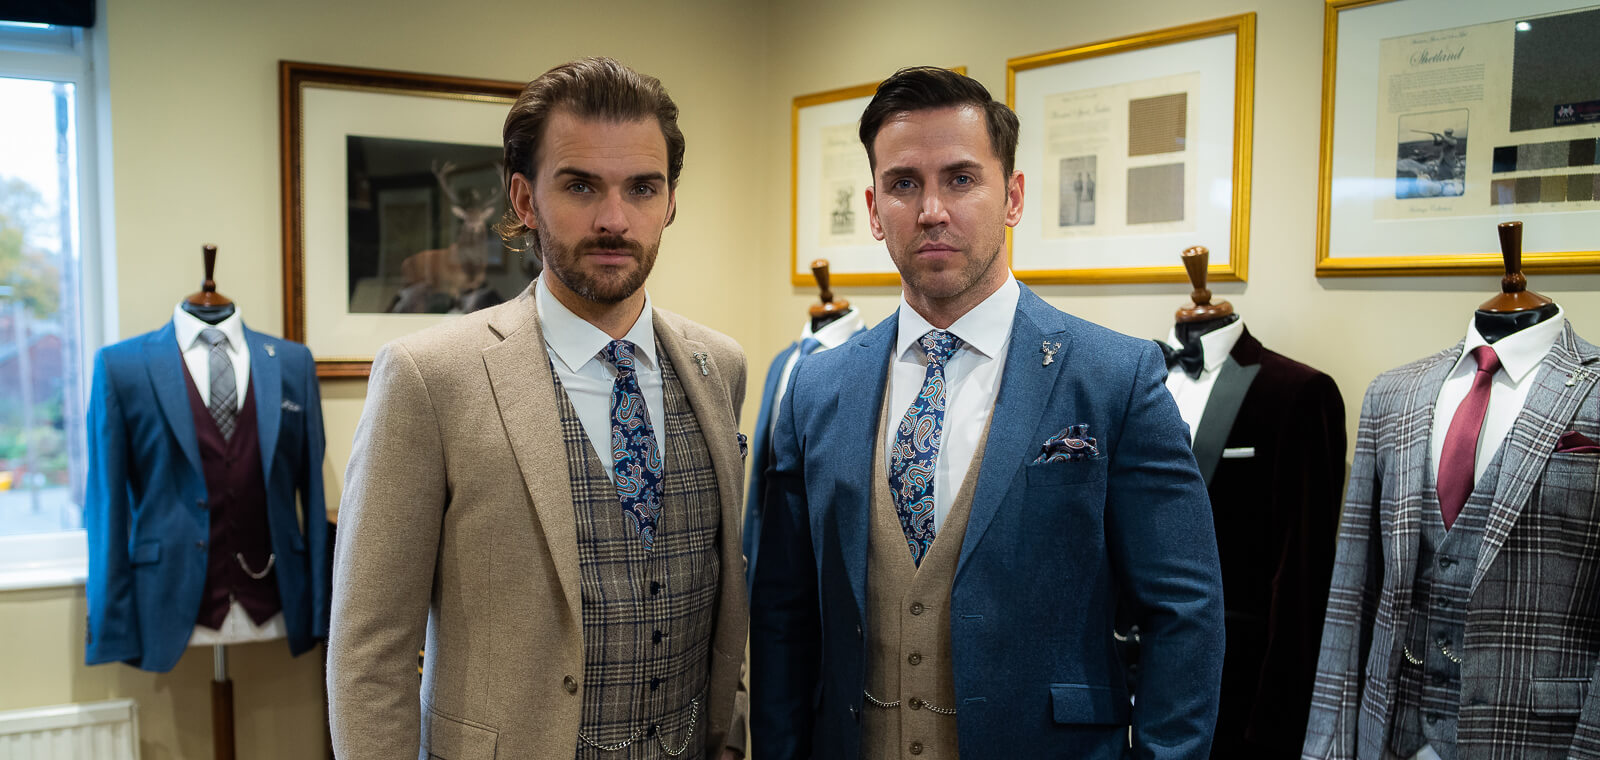 Whitfield & Ward - WEDDING SUIT INSPIRATION - Our Balmoral morning